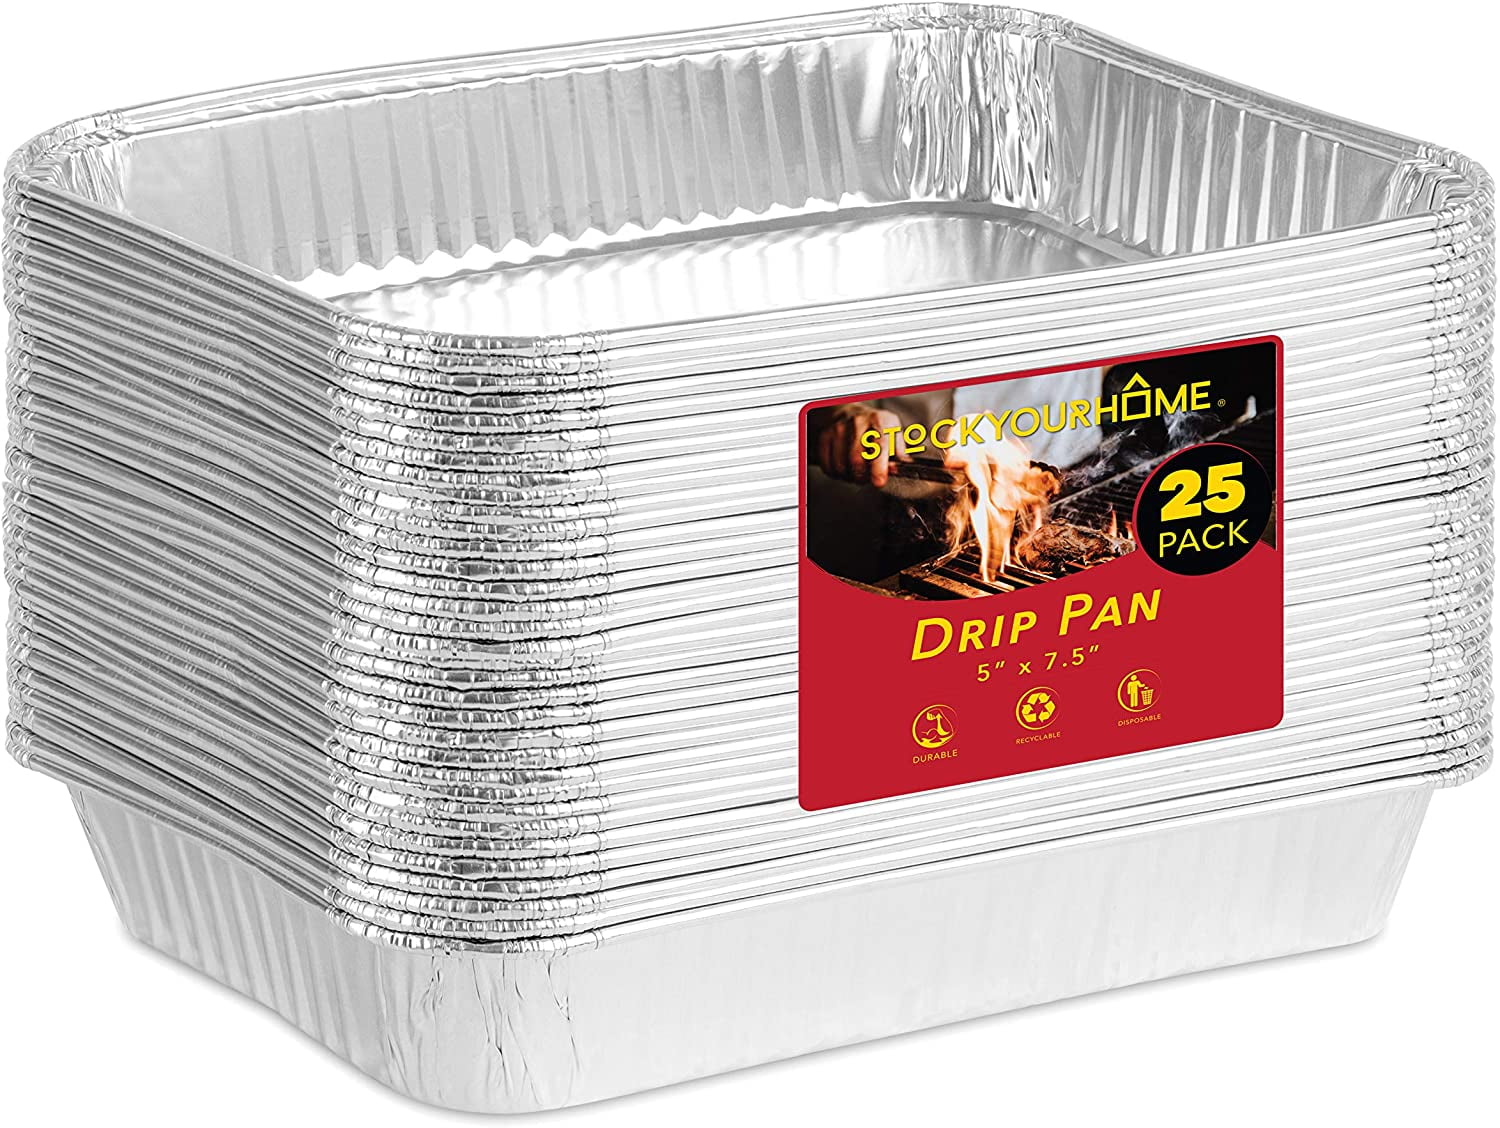 25 Count 1.25" Tall Stock Your Home Disposable Aluminum Foil Drip Pan 